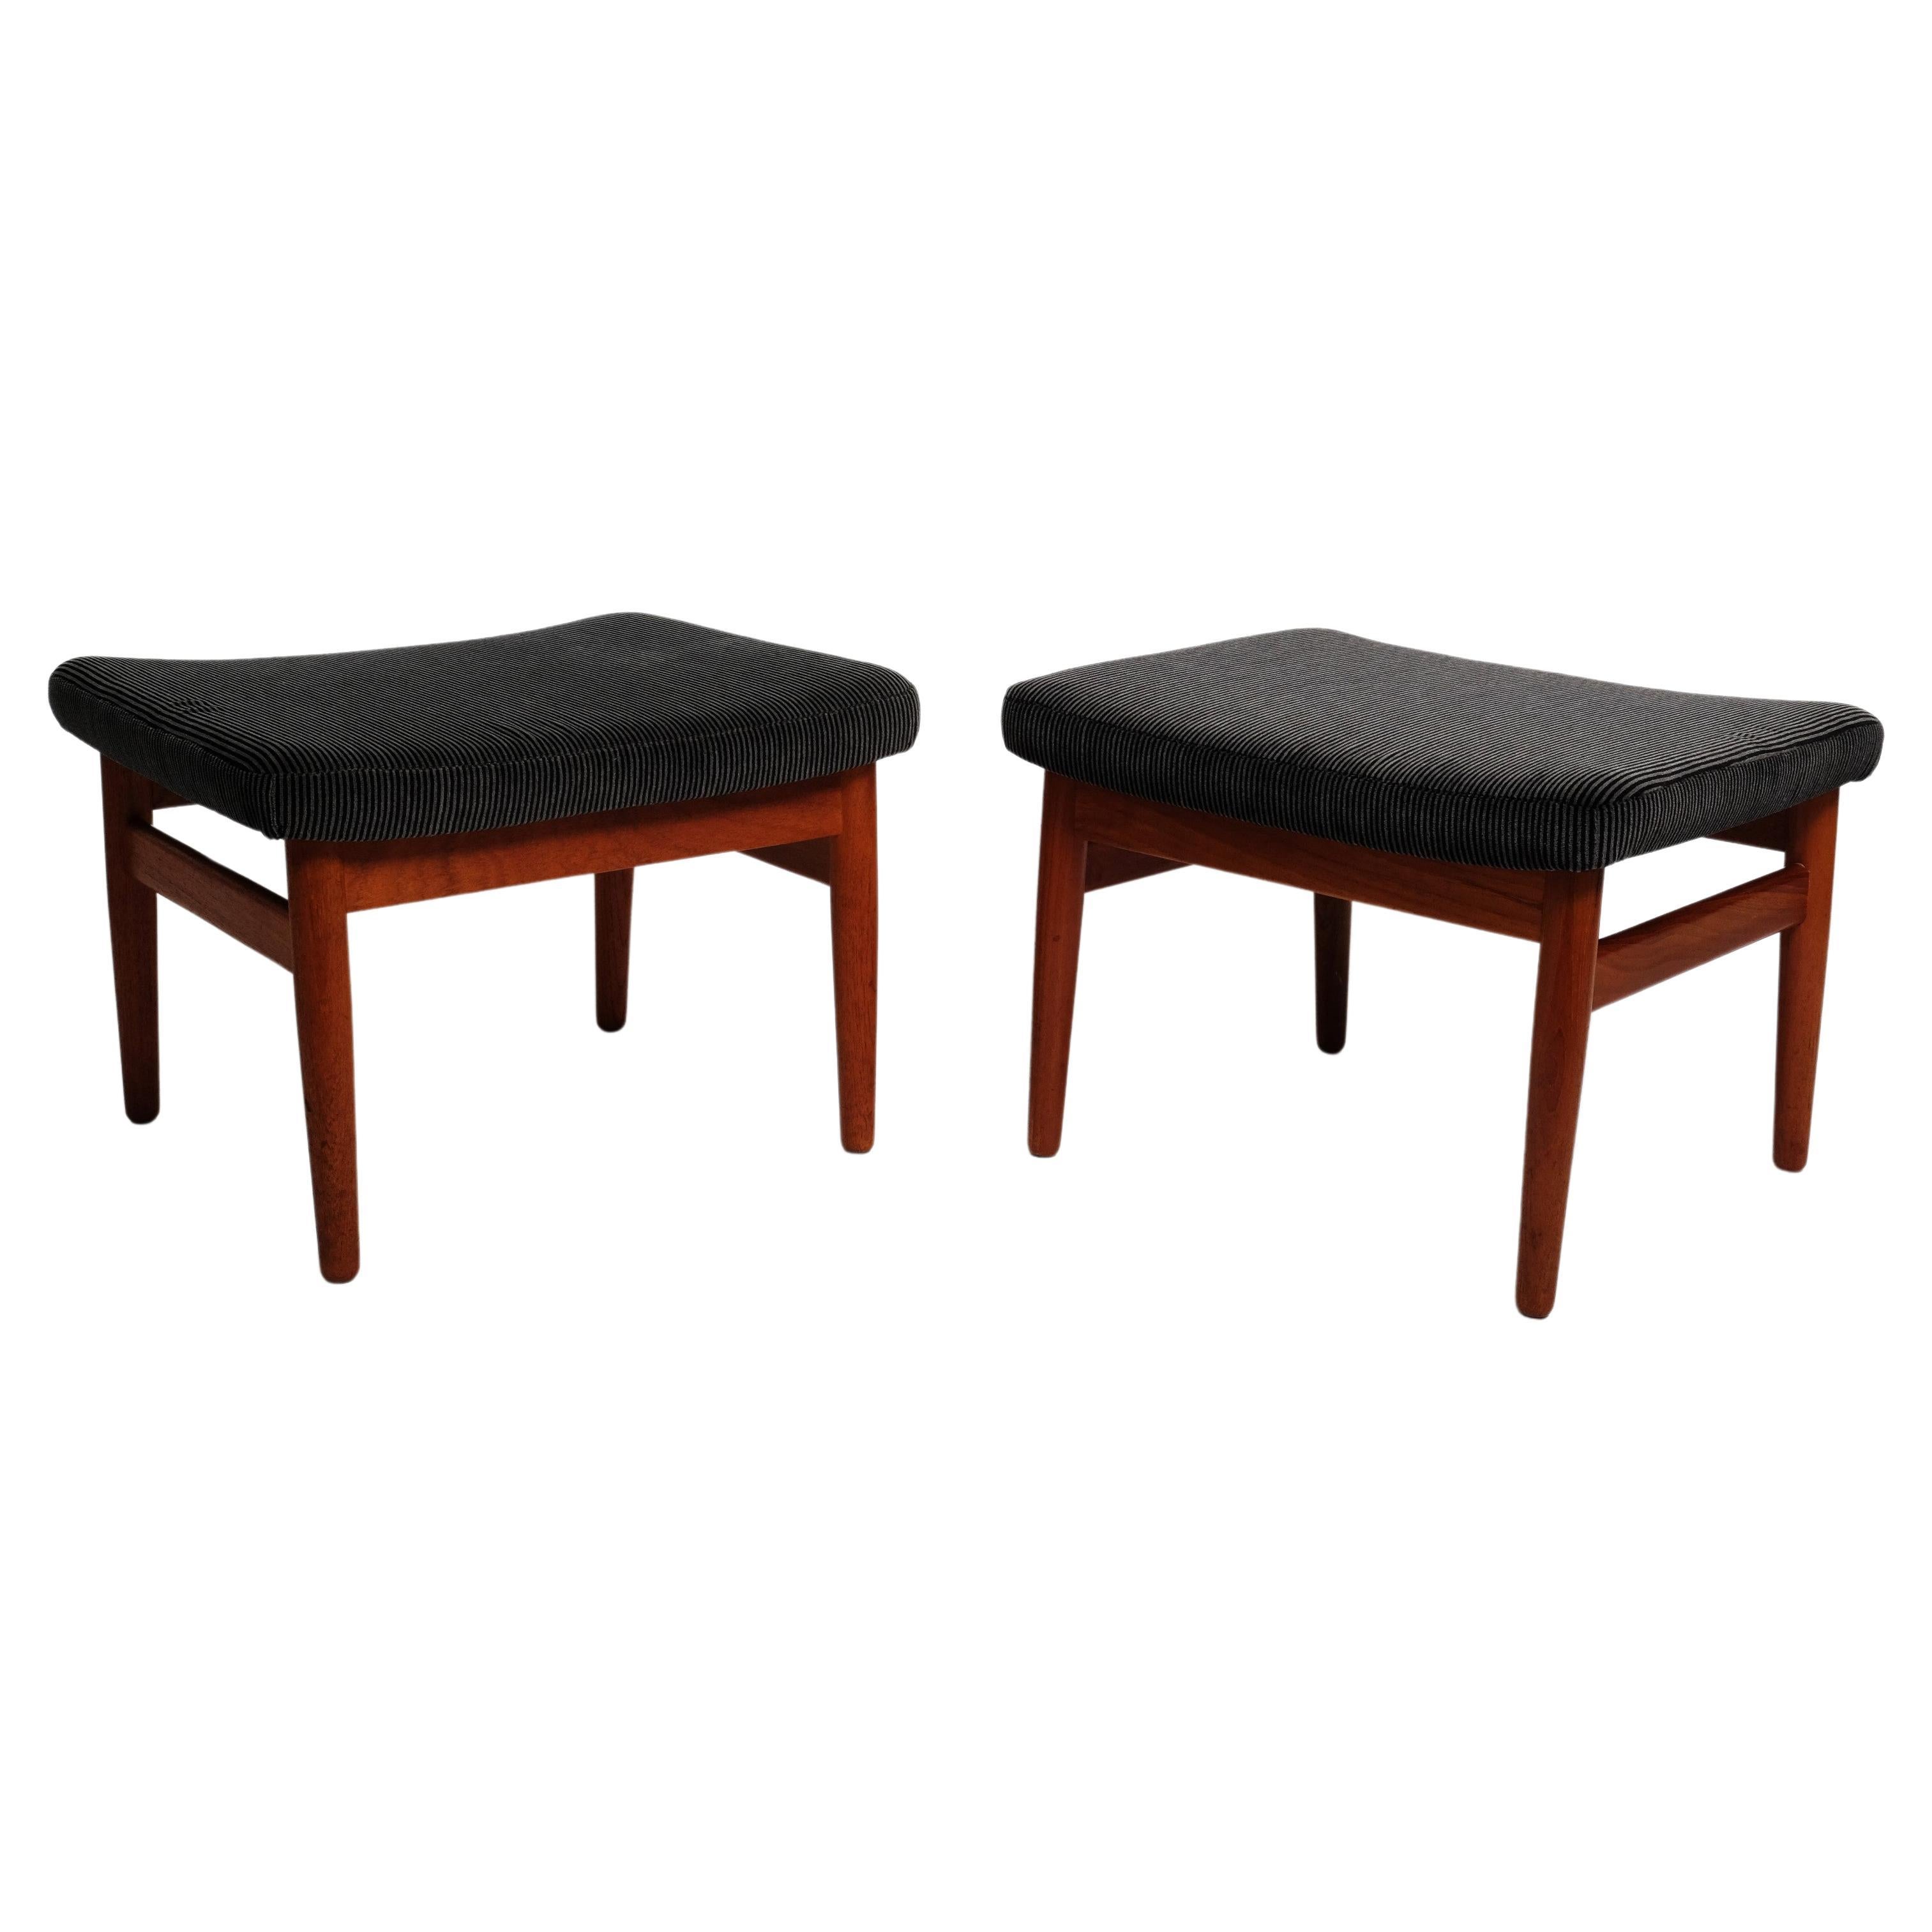 Two Mid-Century Stools by Arne Vodder FD164 Ottomans France & Son, Denmark 1960s For Sale